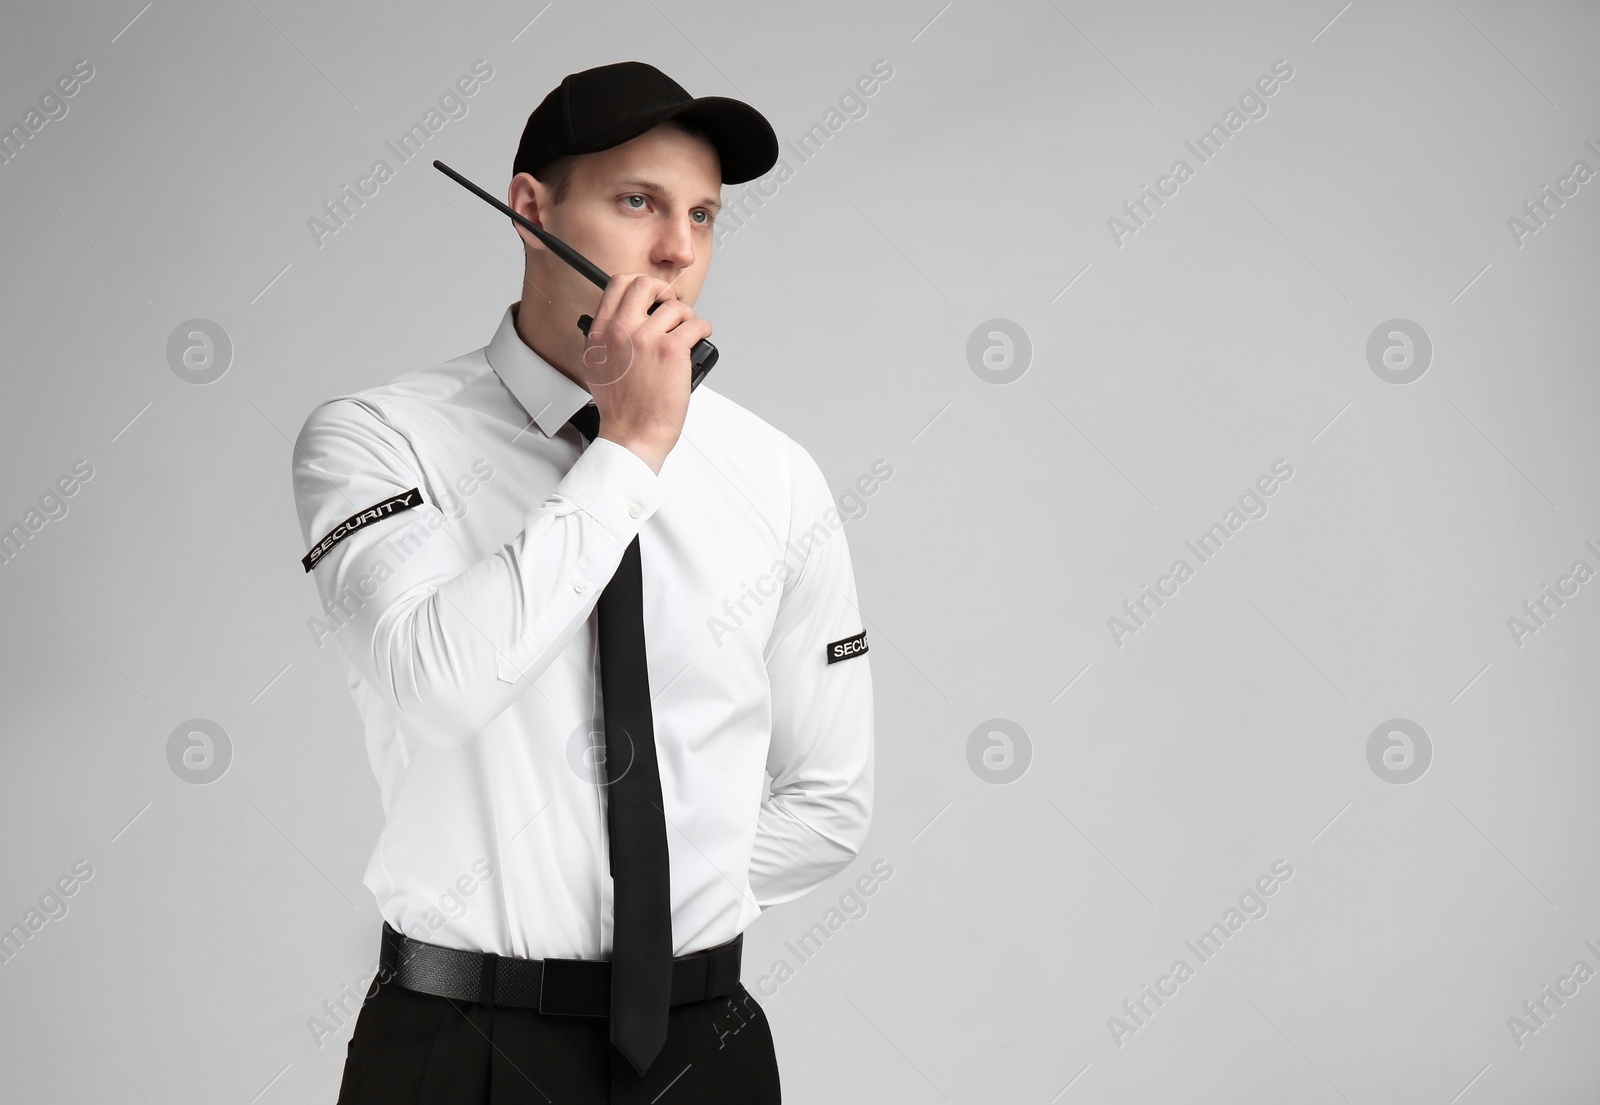 Photo of Male security guard using portable radio transmitter on color background